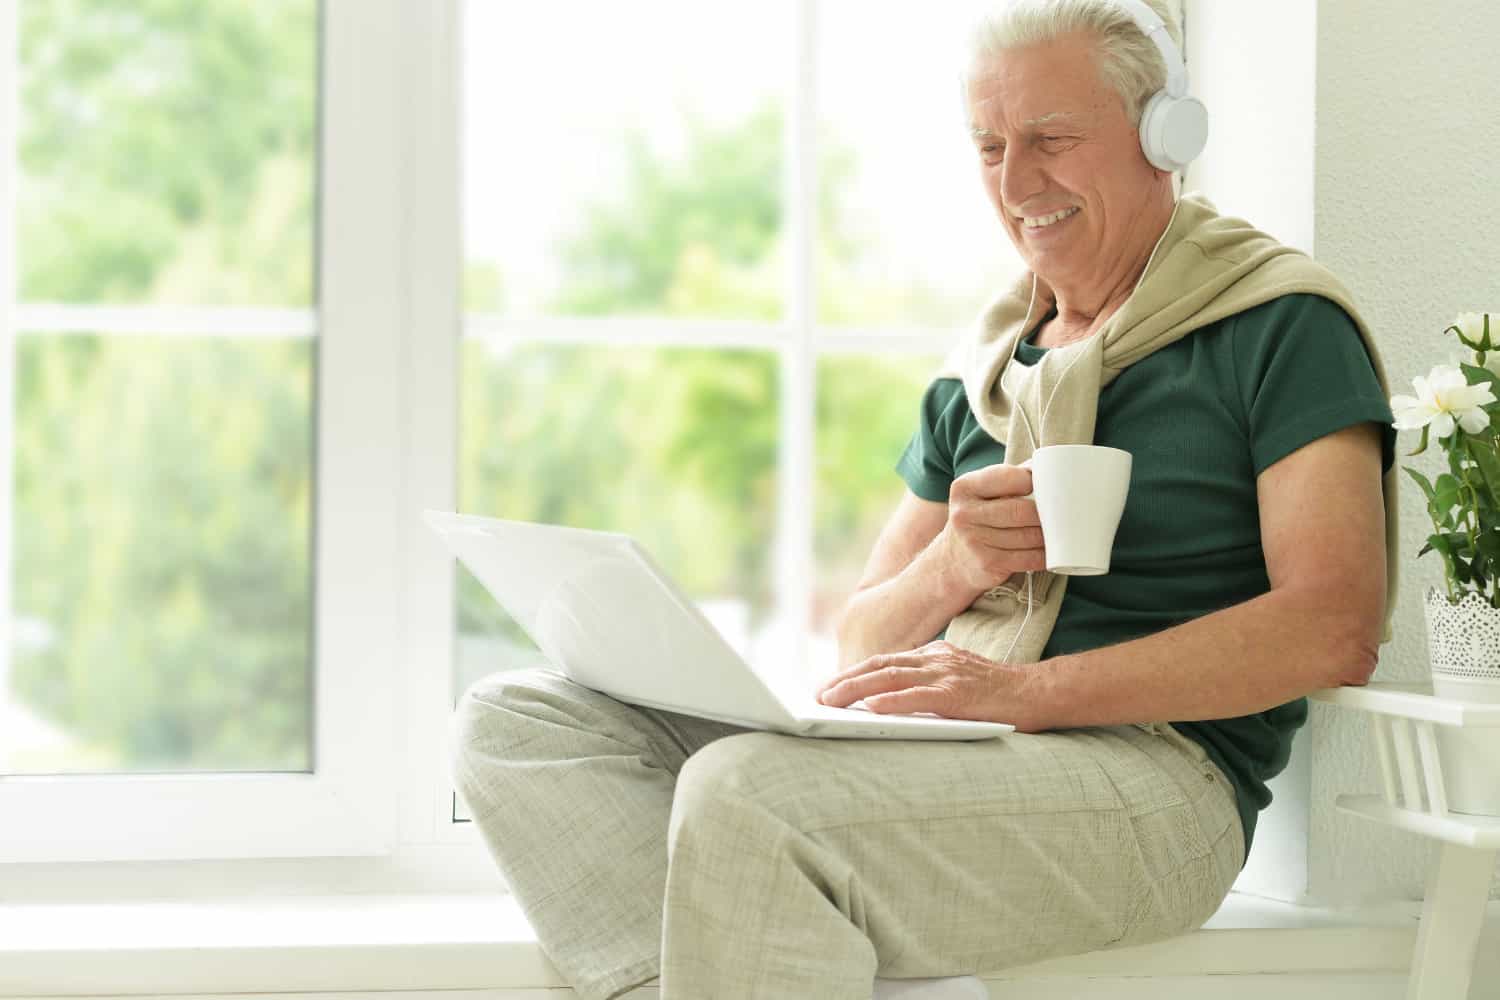 Retired man looking at an article on his laptop